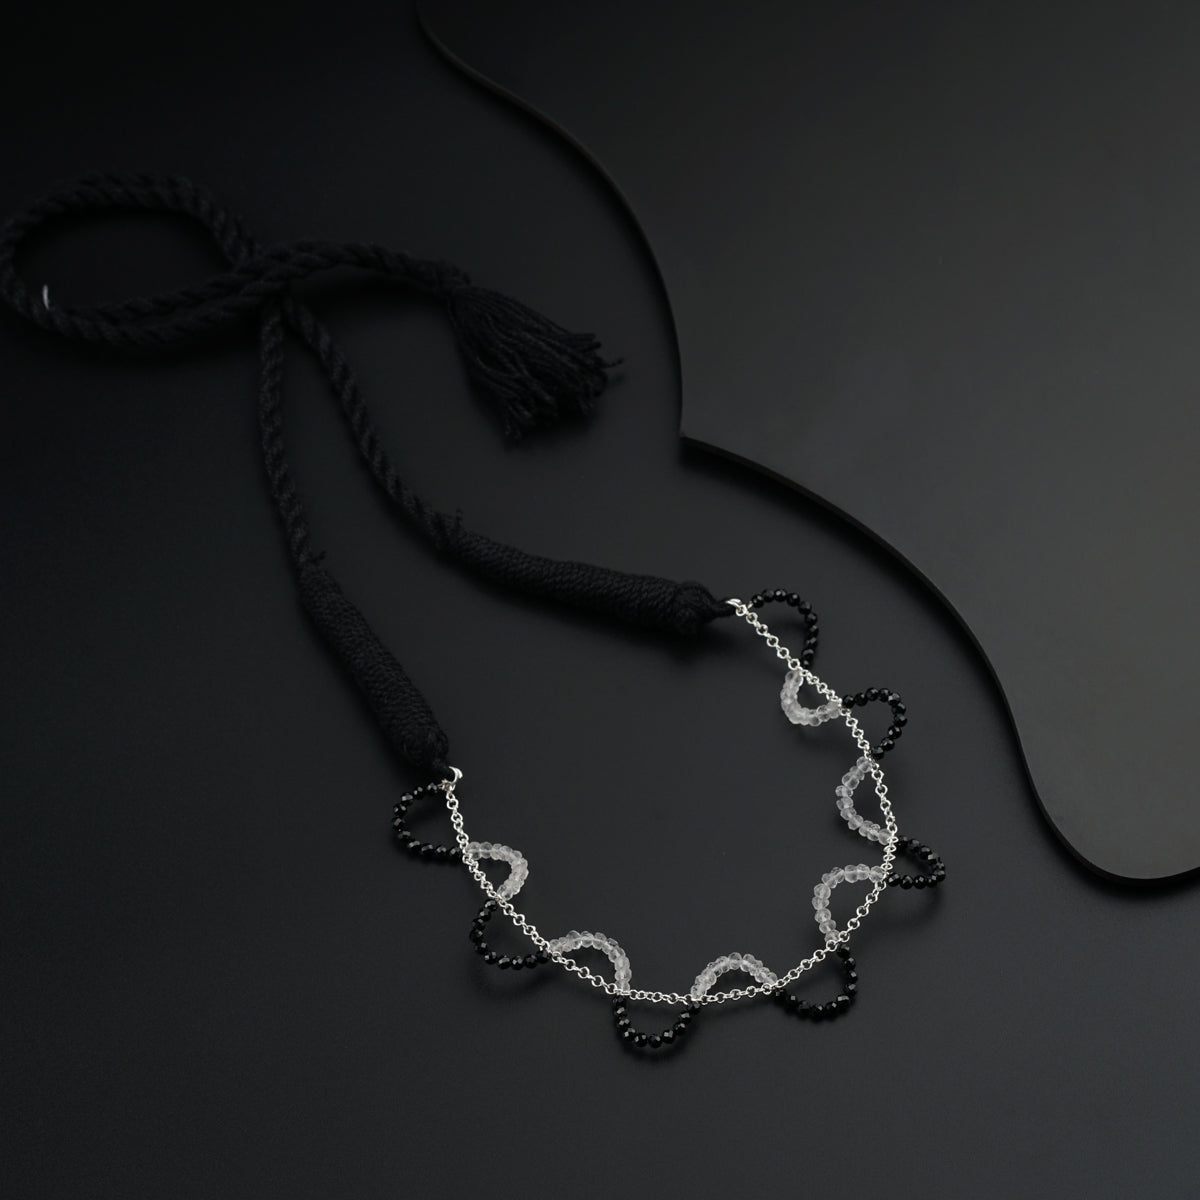 Yin Yang: Silver Necklace with Black spinel and Crystals